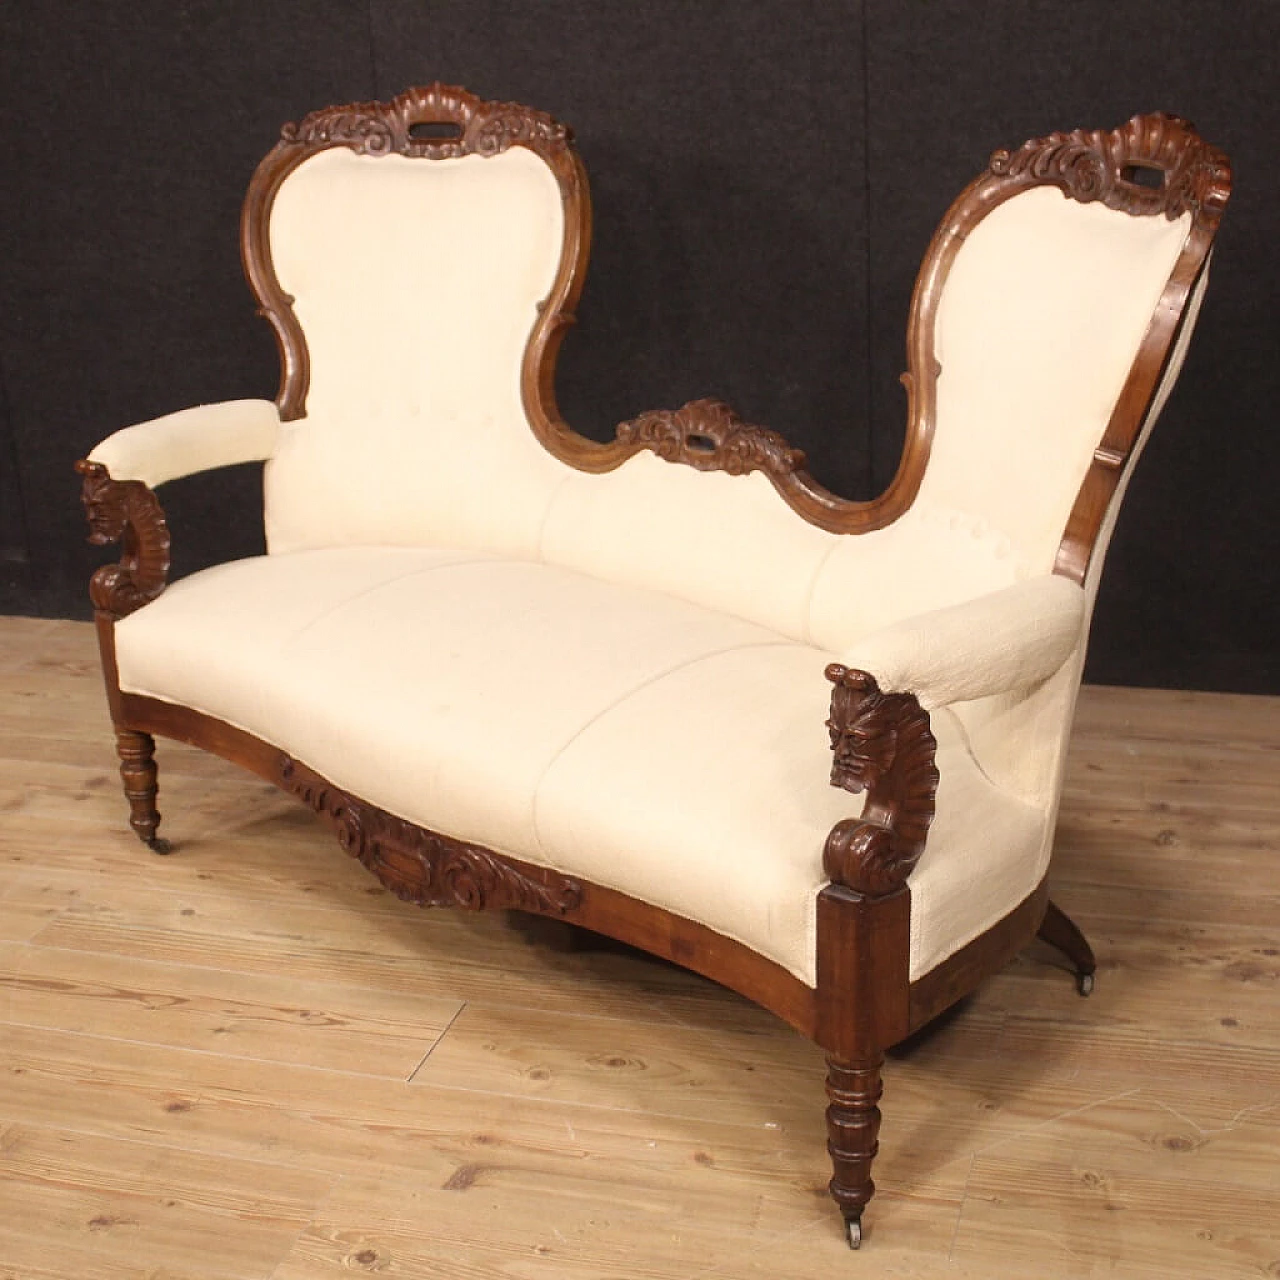 Walnut and fabric sofa with casters, late 19th century 1090597